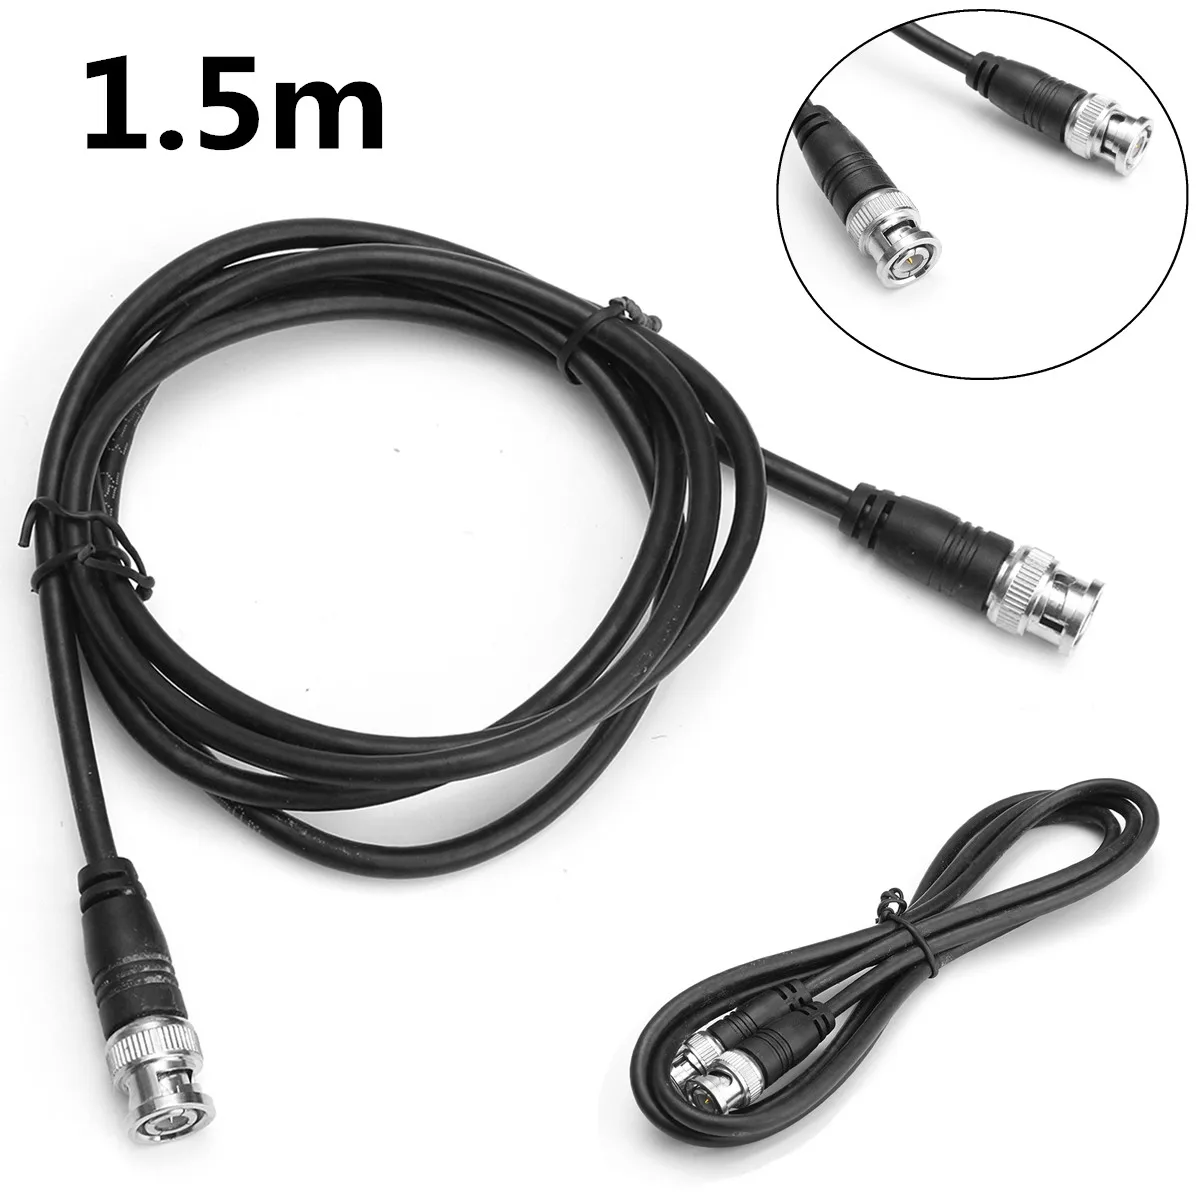 Image of "1.5m BNCc Leads RG59 Connector For CCTV Cameras to DVR Video Cable Wire Cord BNC Patch Leads High Quality jumper video cable"